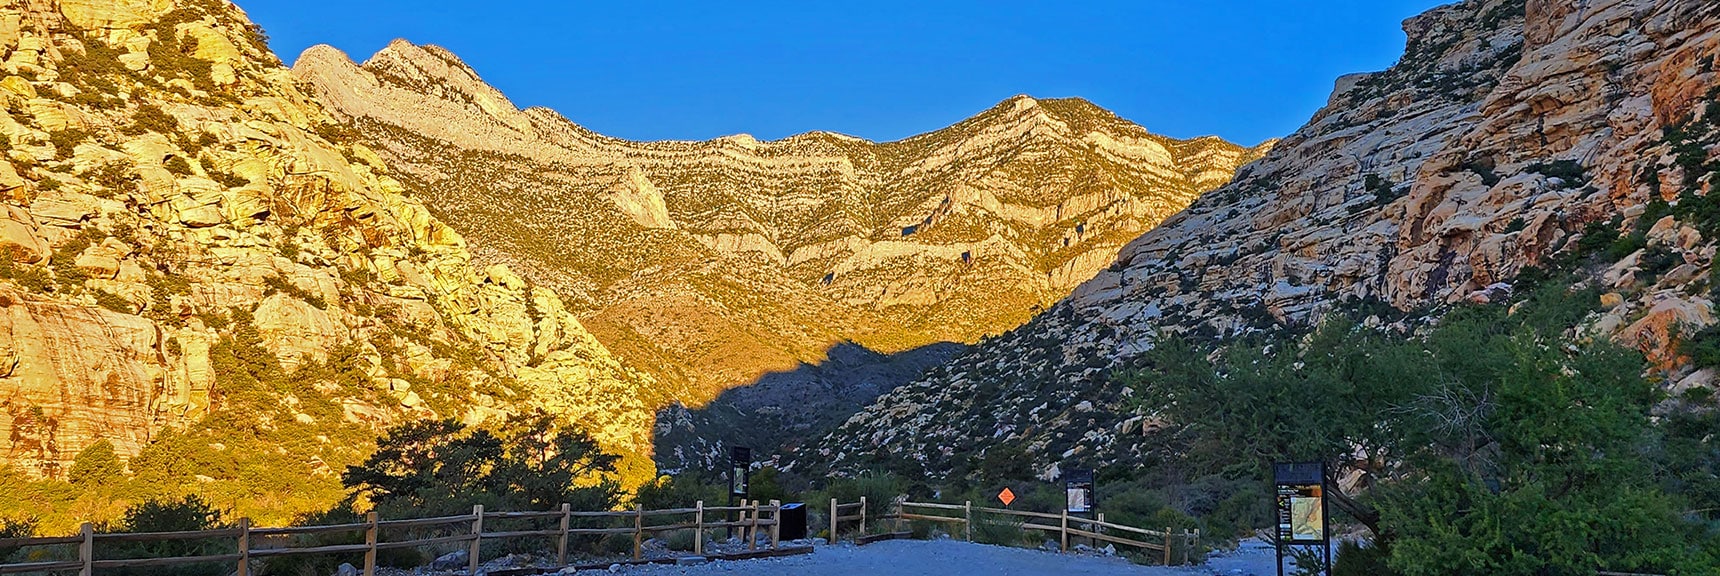 La Madre Mts. Ridgeline from Willow Spring Picnic Area | Switchback Spring Ridge | Red Rock Canyon, Nevada